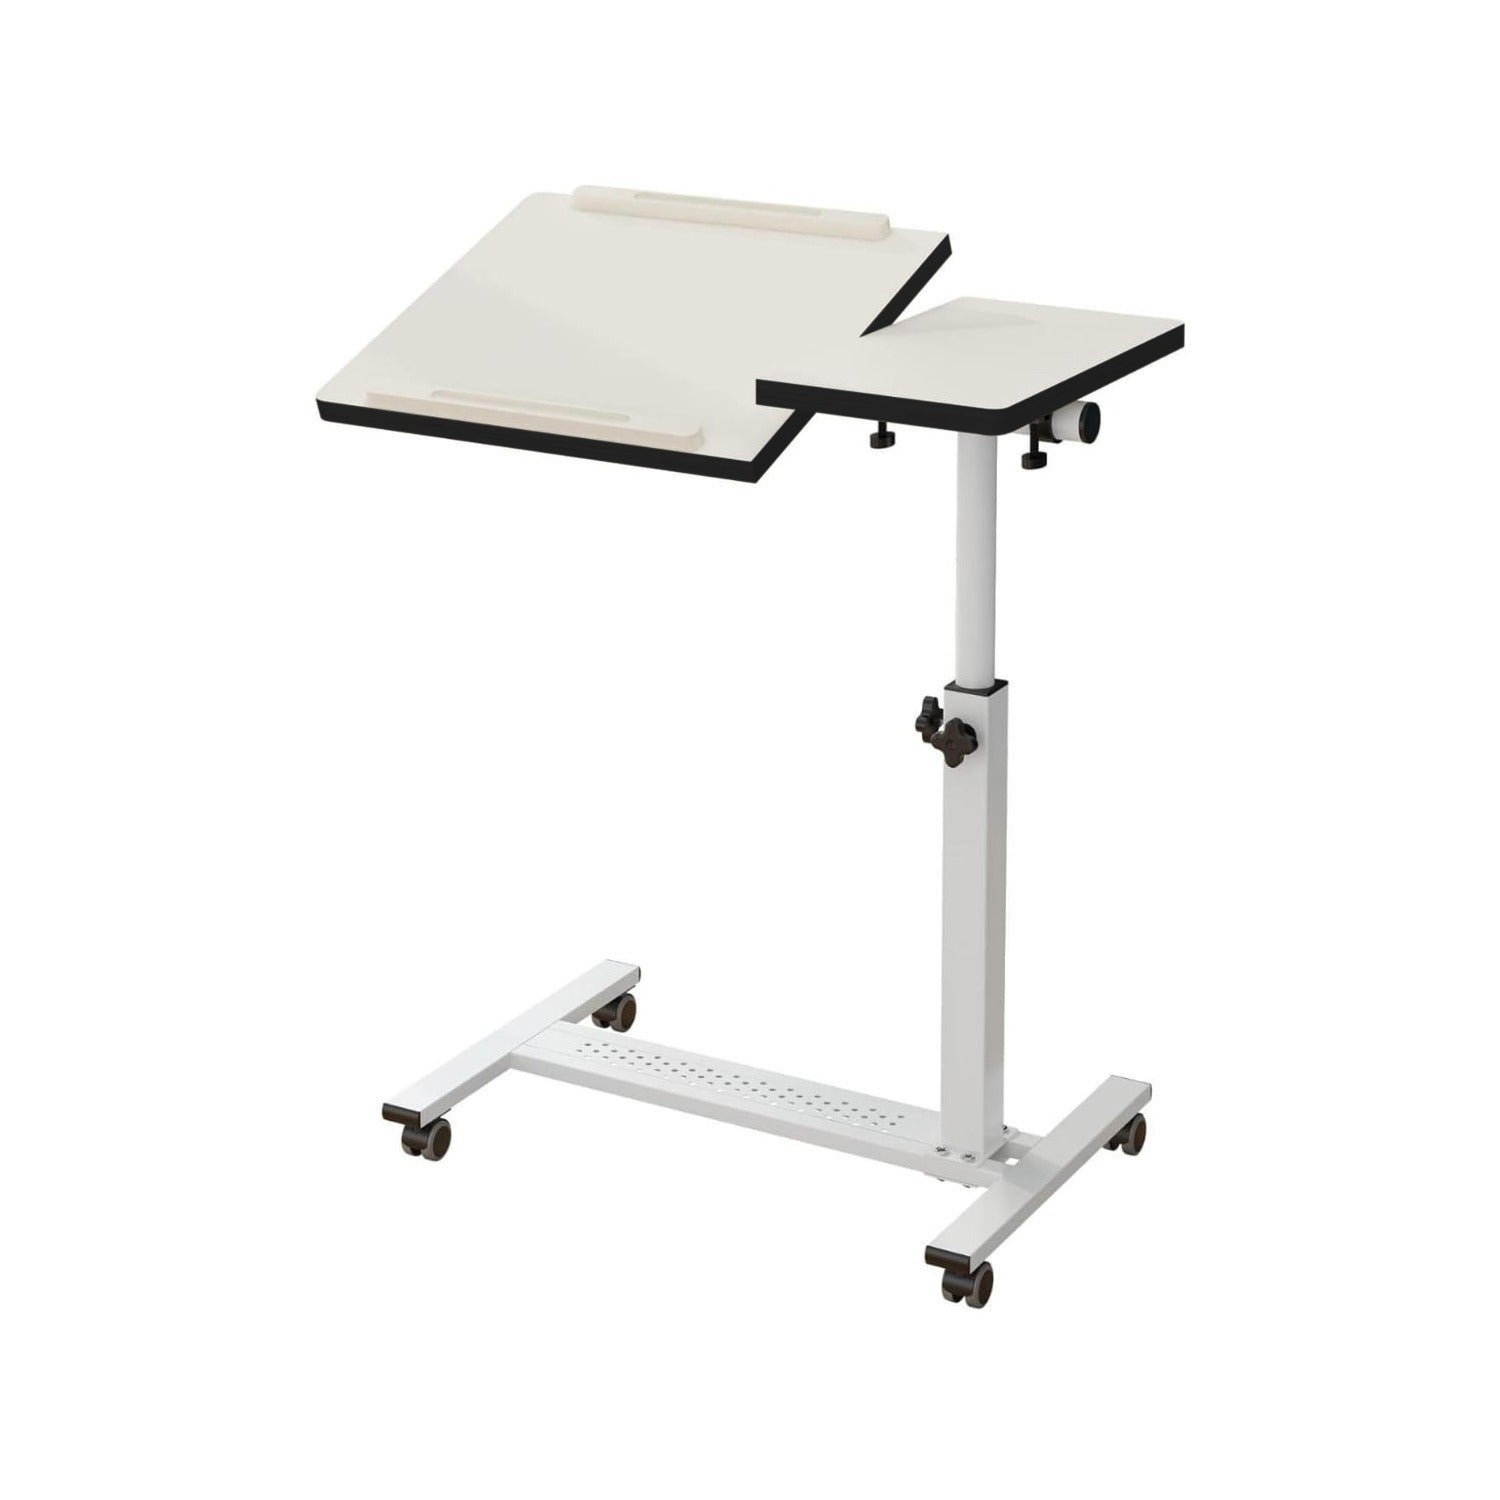 Adjustable Overbed Laptop Stand Table.